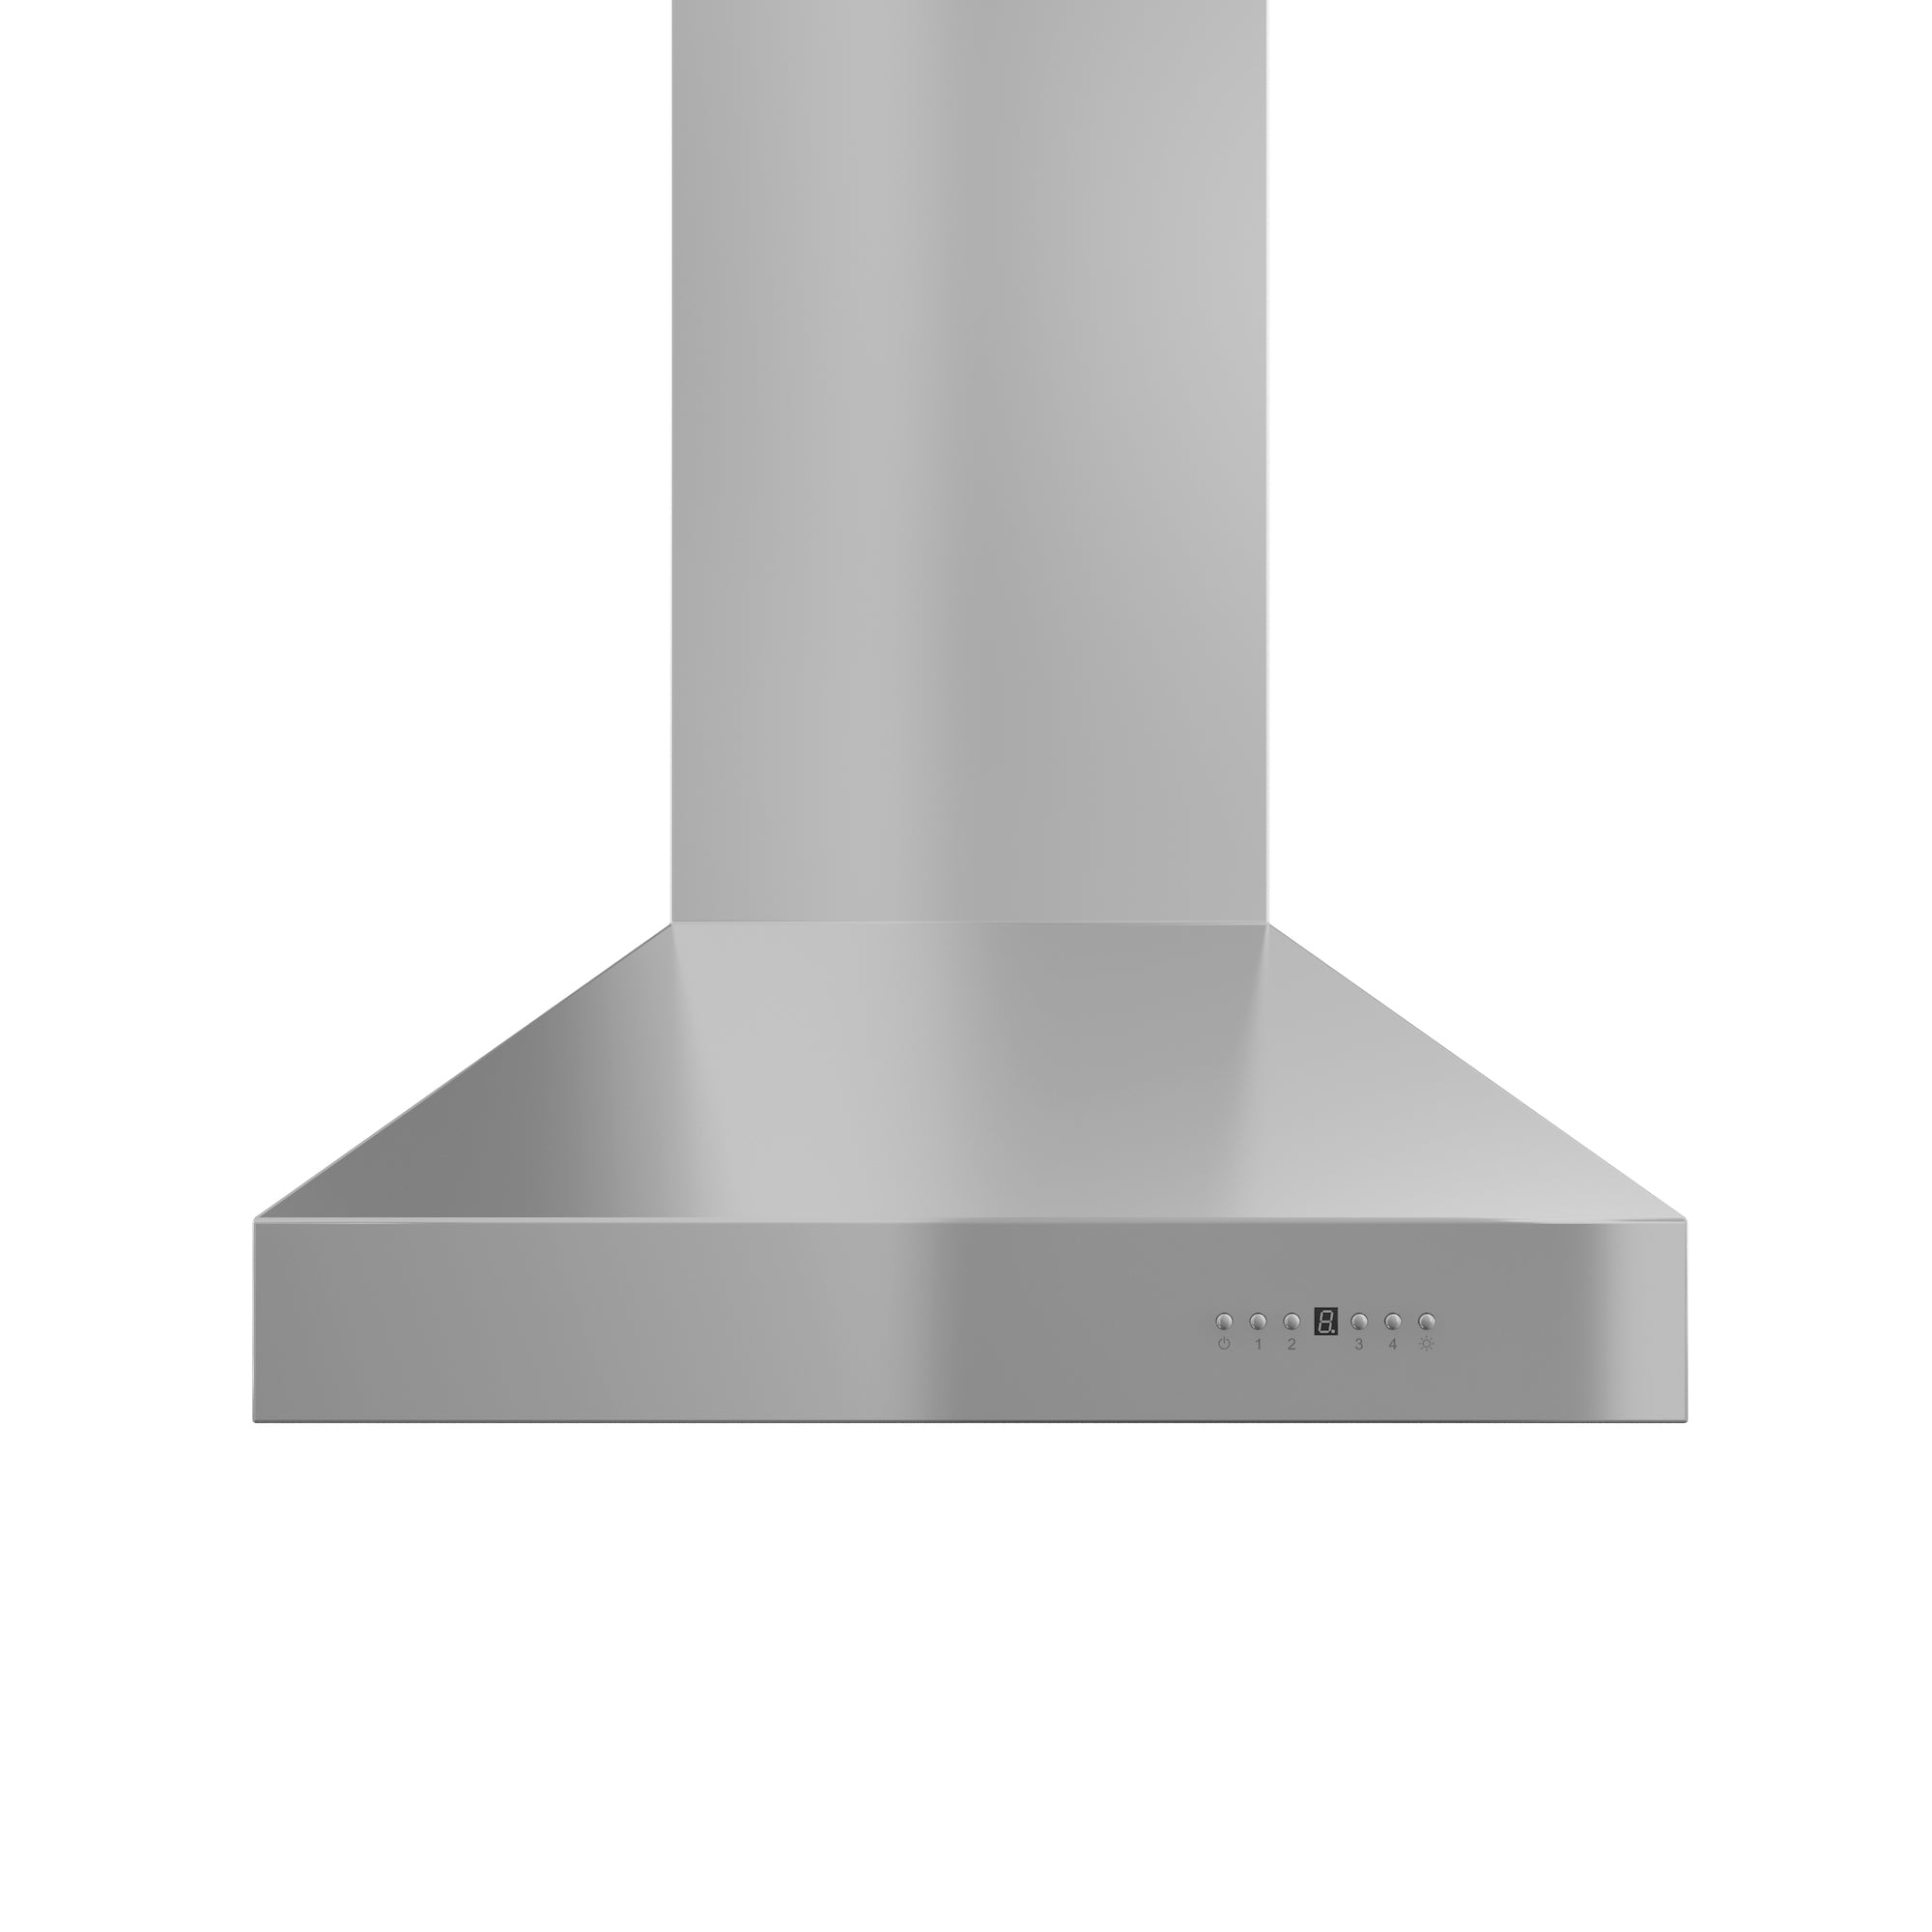 ZLINE 36" Ducted Wall Mount Range Hood with Single Remote Blower in Stainless Steel (697-RS-36-400)